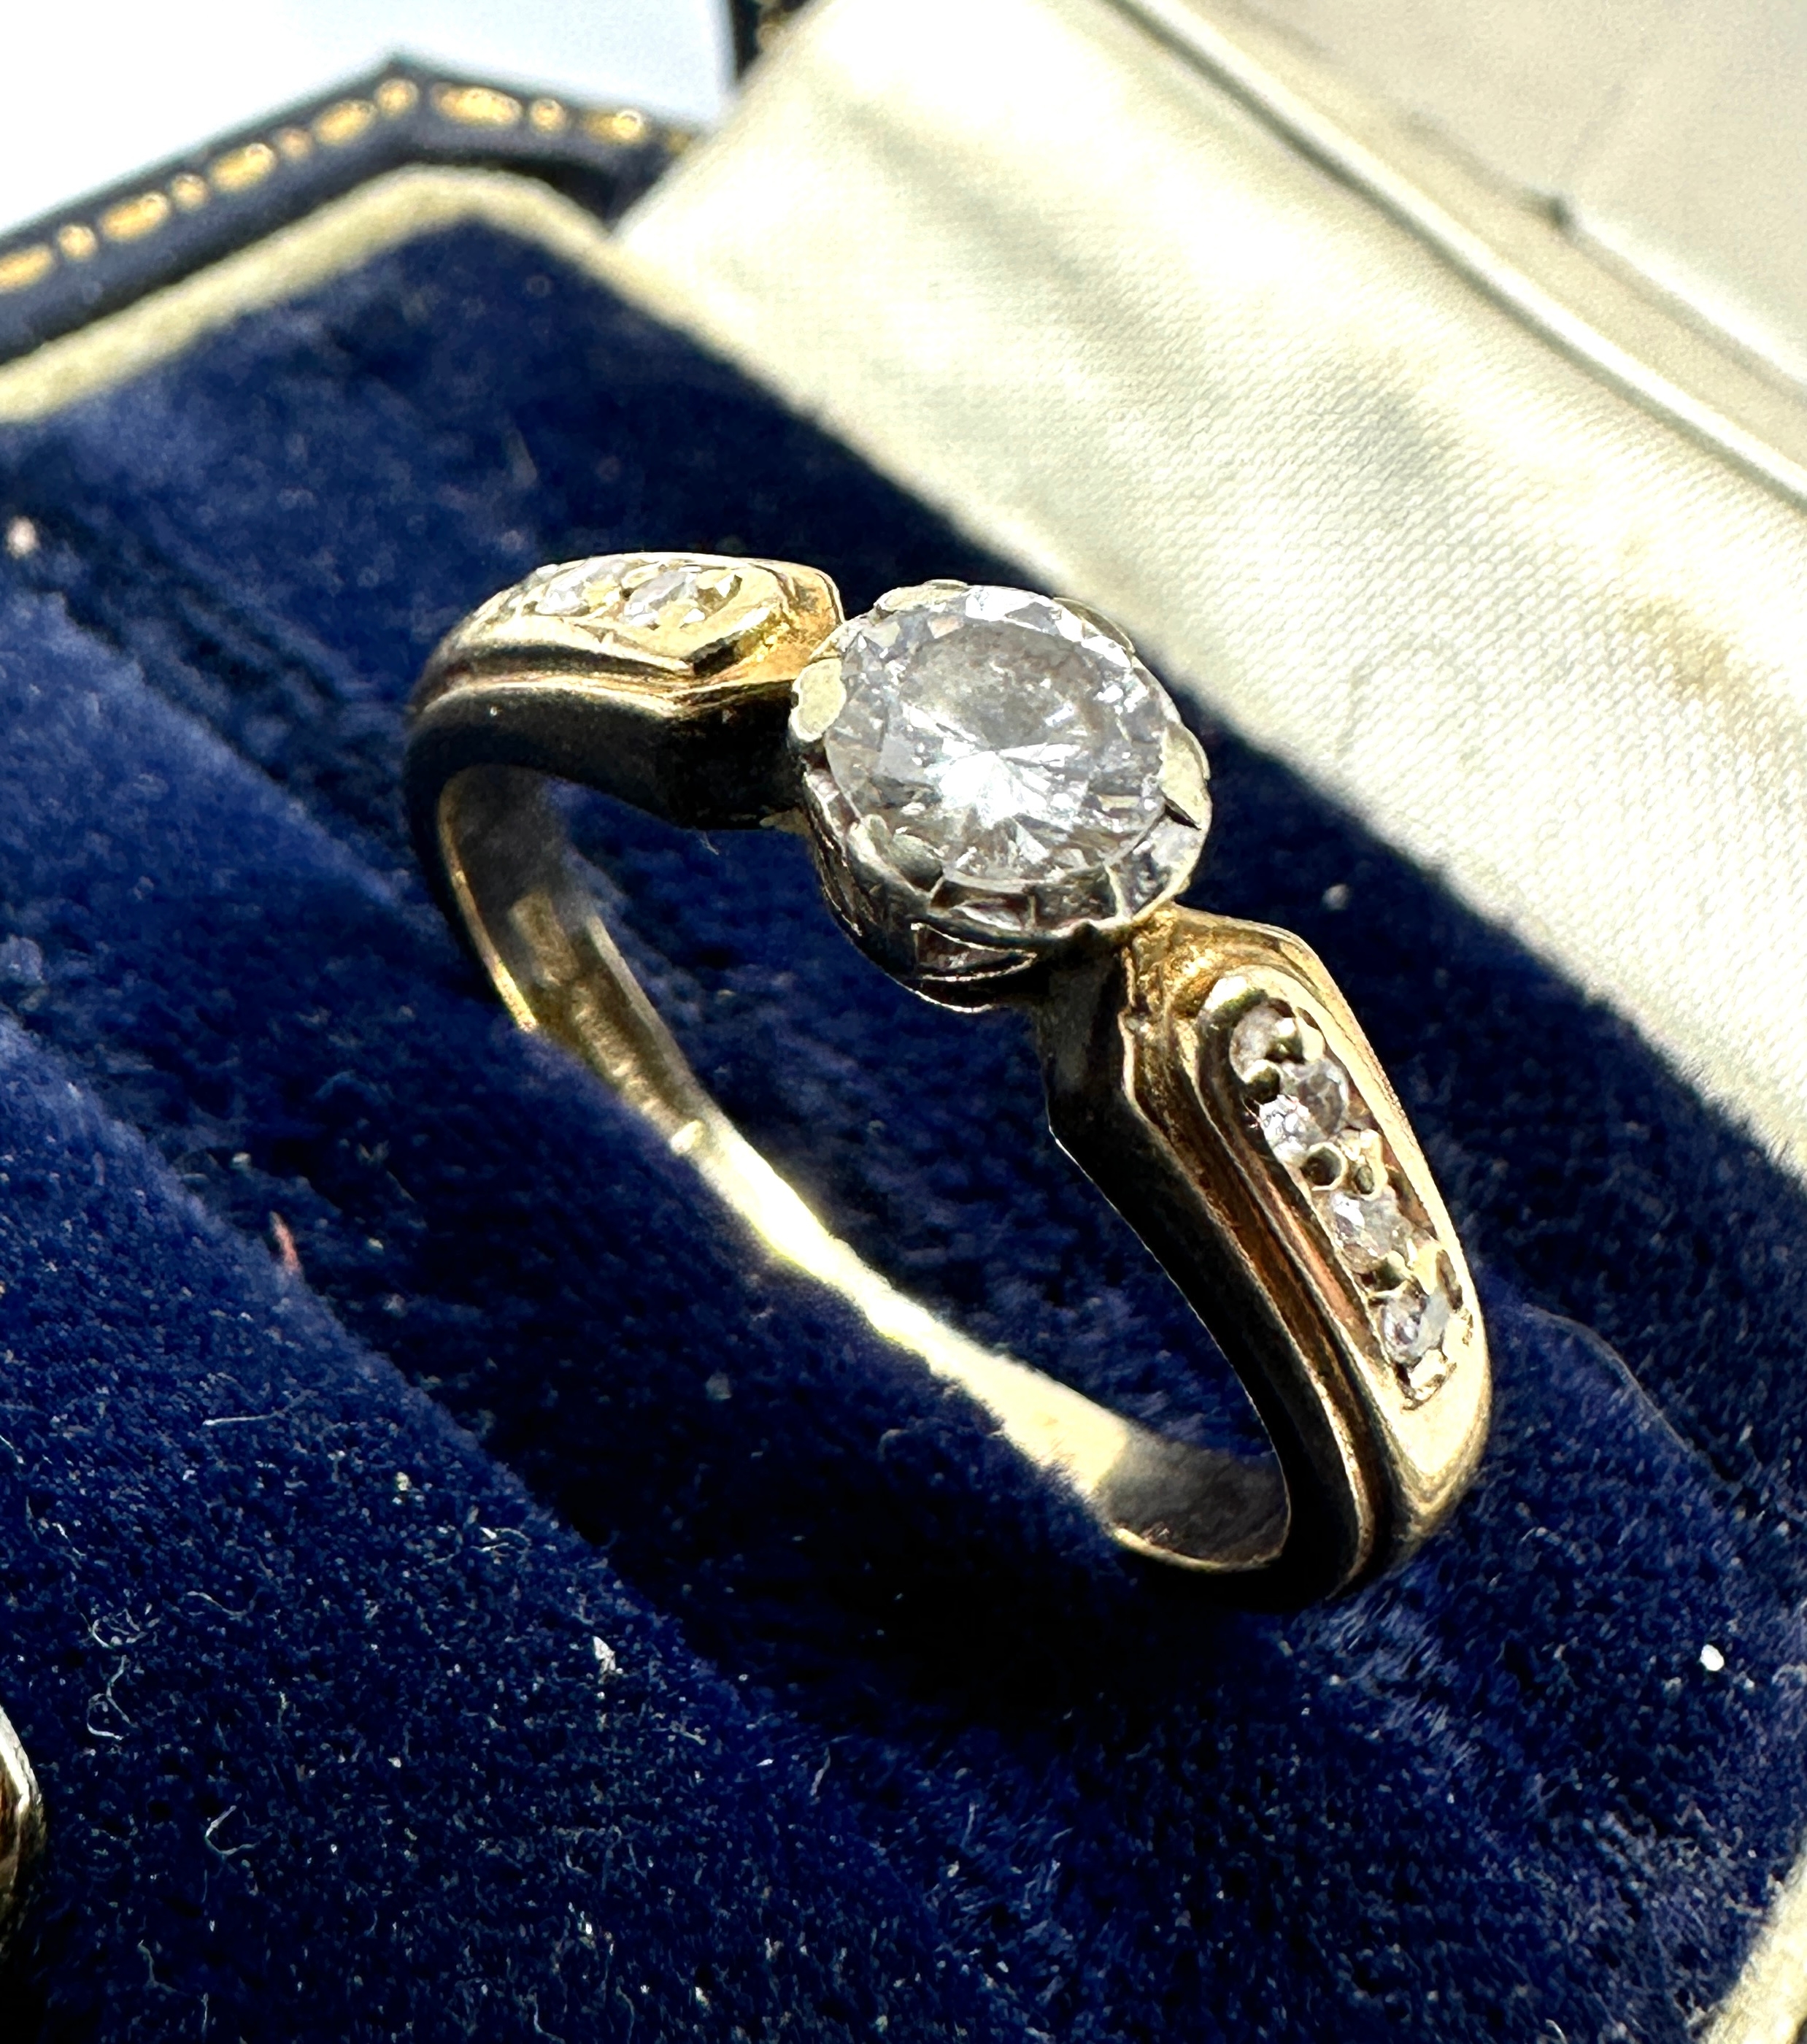 9ct gold diamond solitaire ring with diamond shoulders est 0.50ct diamonds weight 2.8g - Image 3 of 4